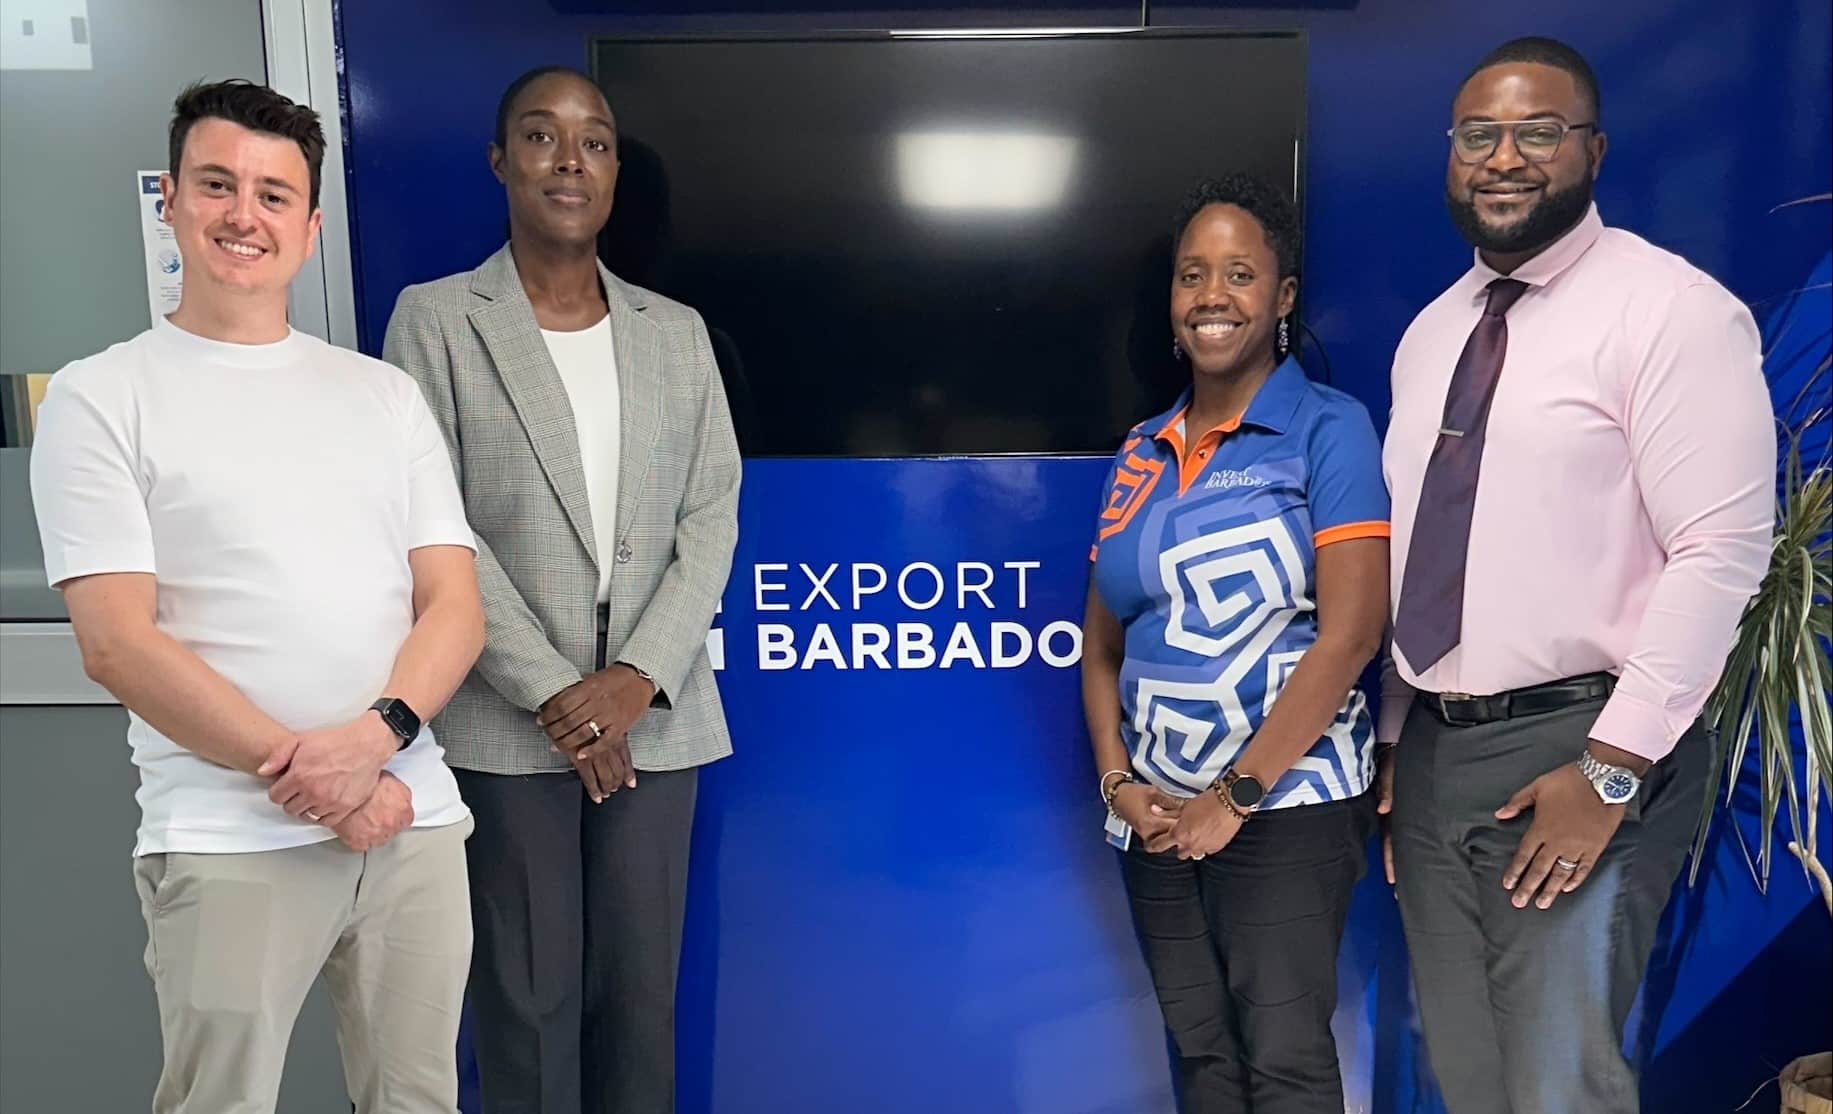 Meeting was held between Global OTEC and Barbados government representatives at the Export Barbados (BIDC) headquarters with the Caribbean Development Bank (CDB)